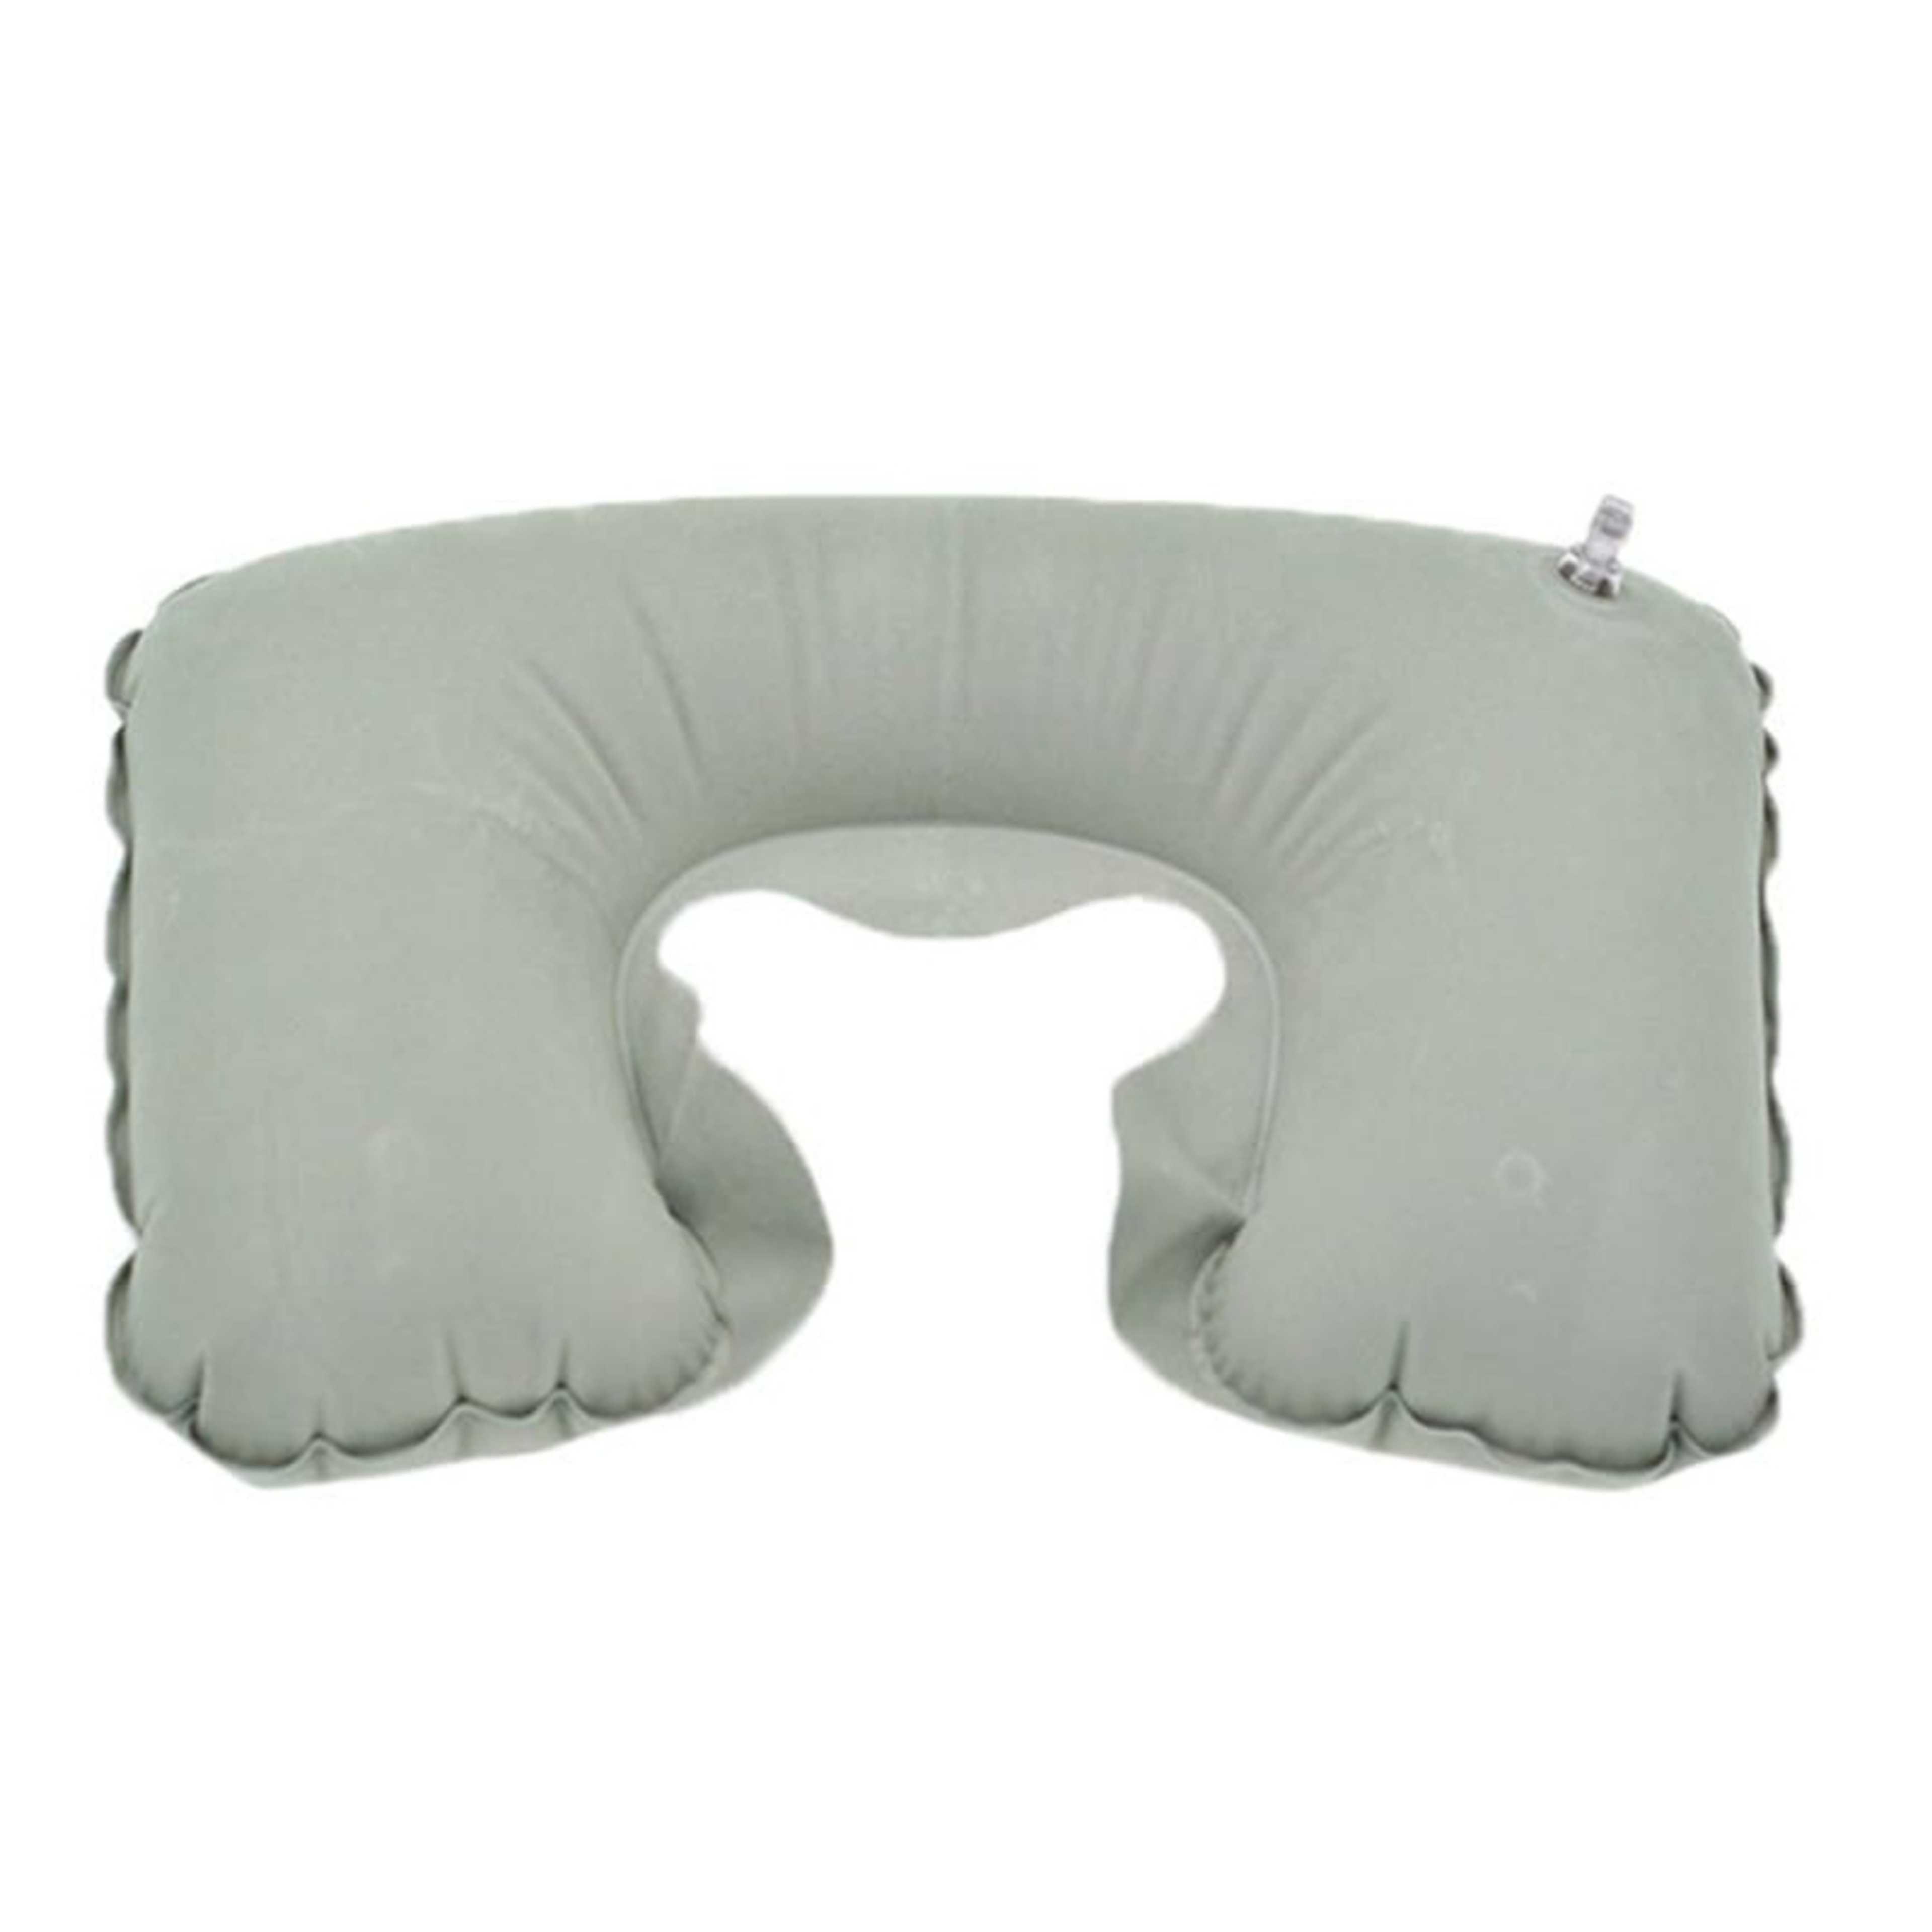 Inflatable U Shaped Travel Pillow Cushion Pillow For Neck